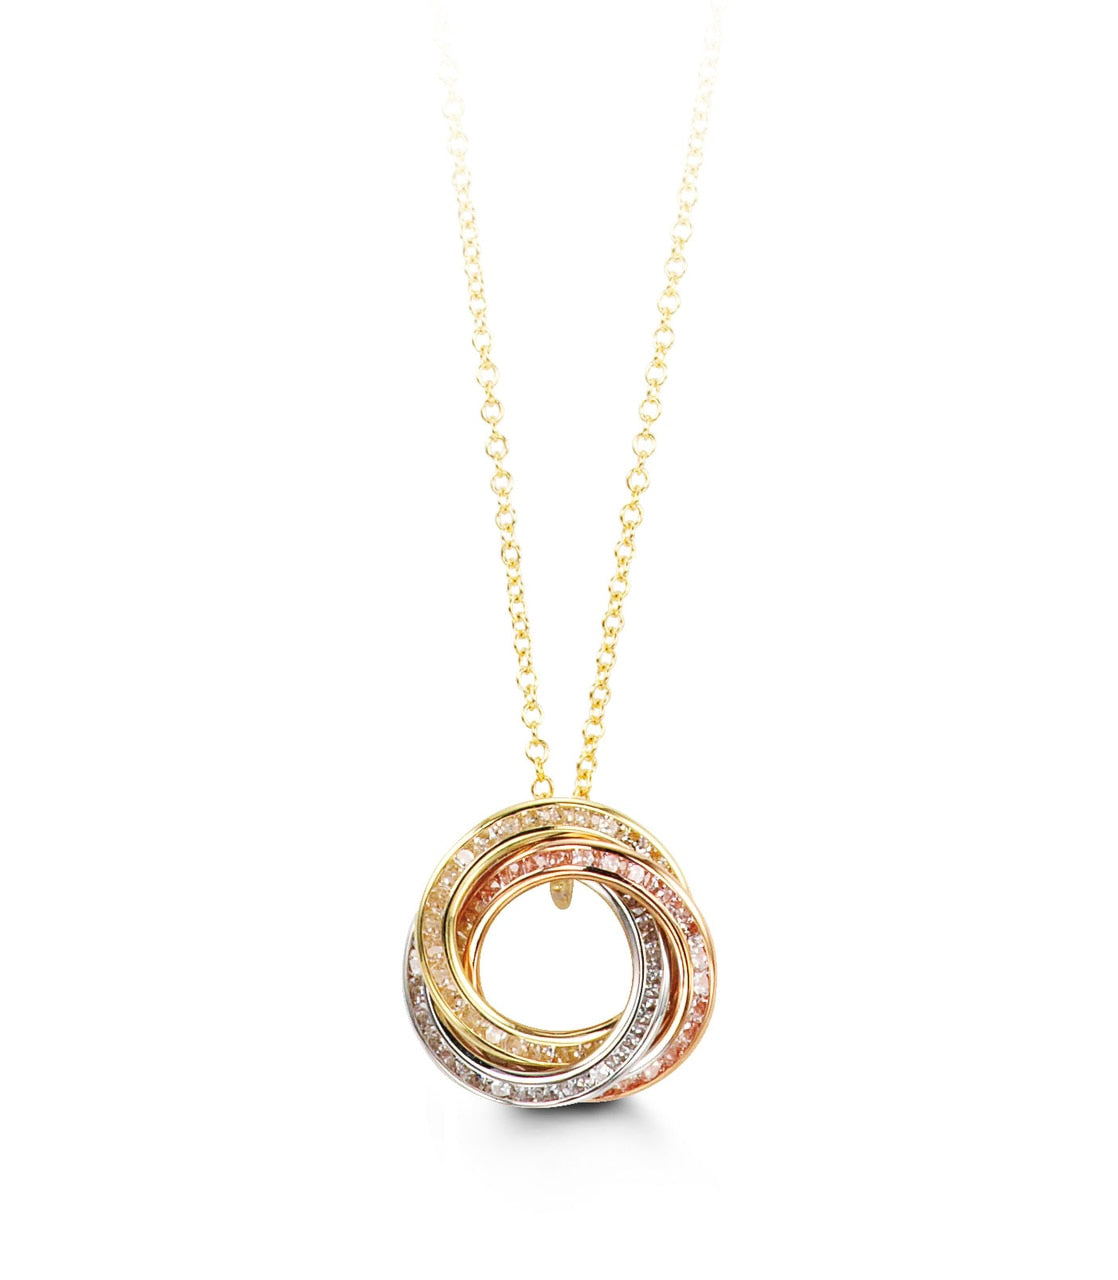 10K Yellow, White and Rose Gold CZ Forever Love Ring Pendant with Chain